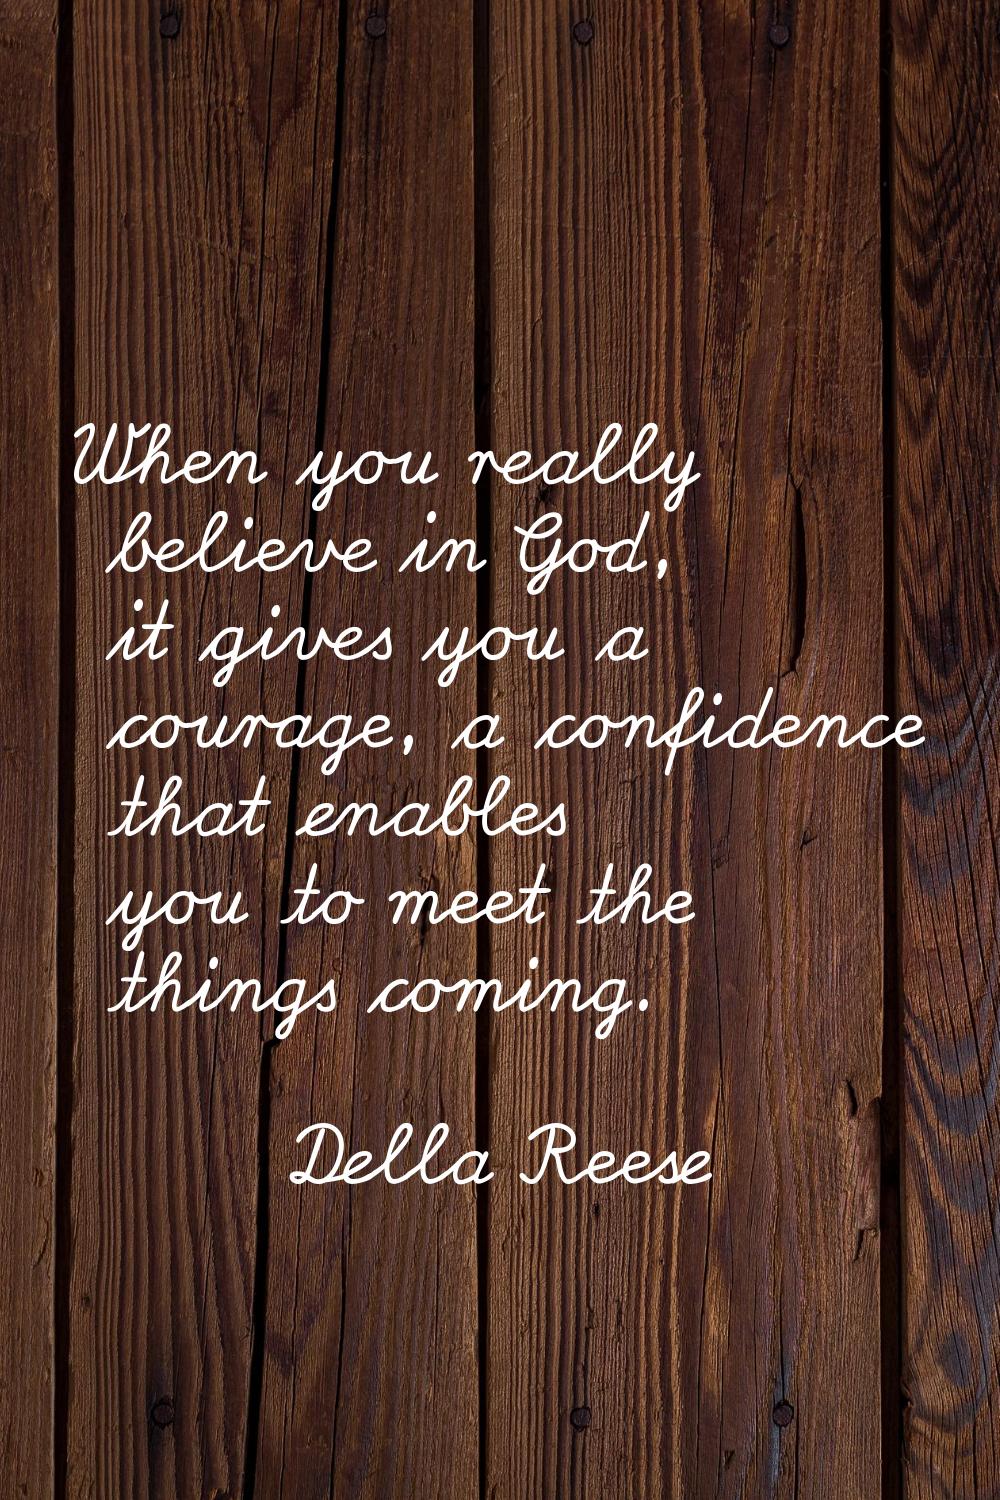 When you really believe in God, it gives you a courage, a confidence that enables you to meet the t